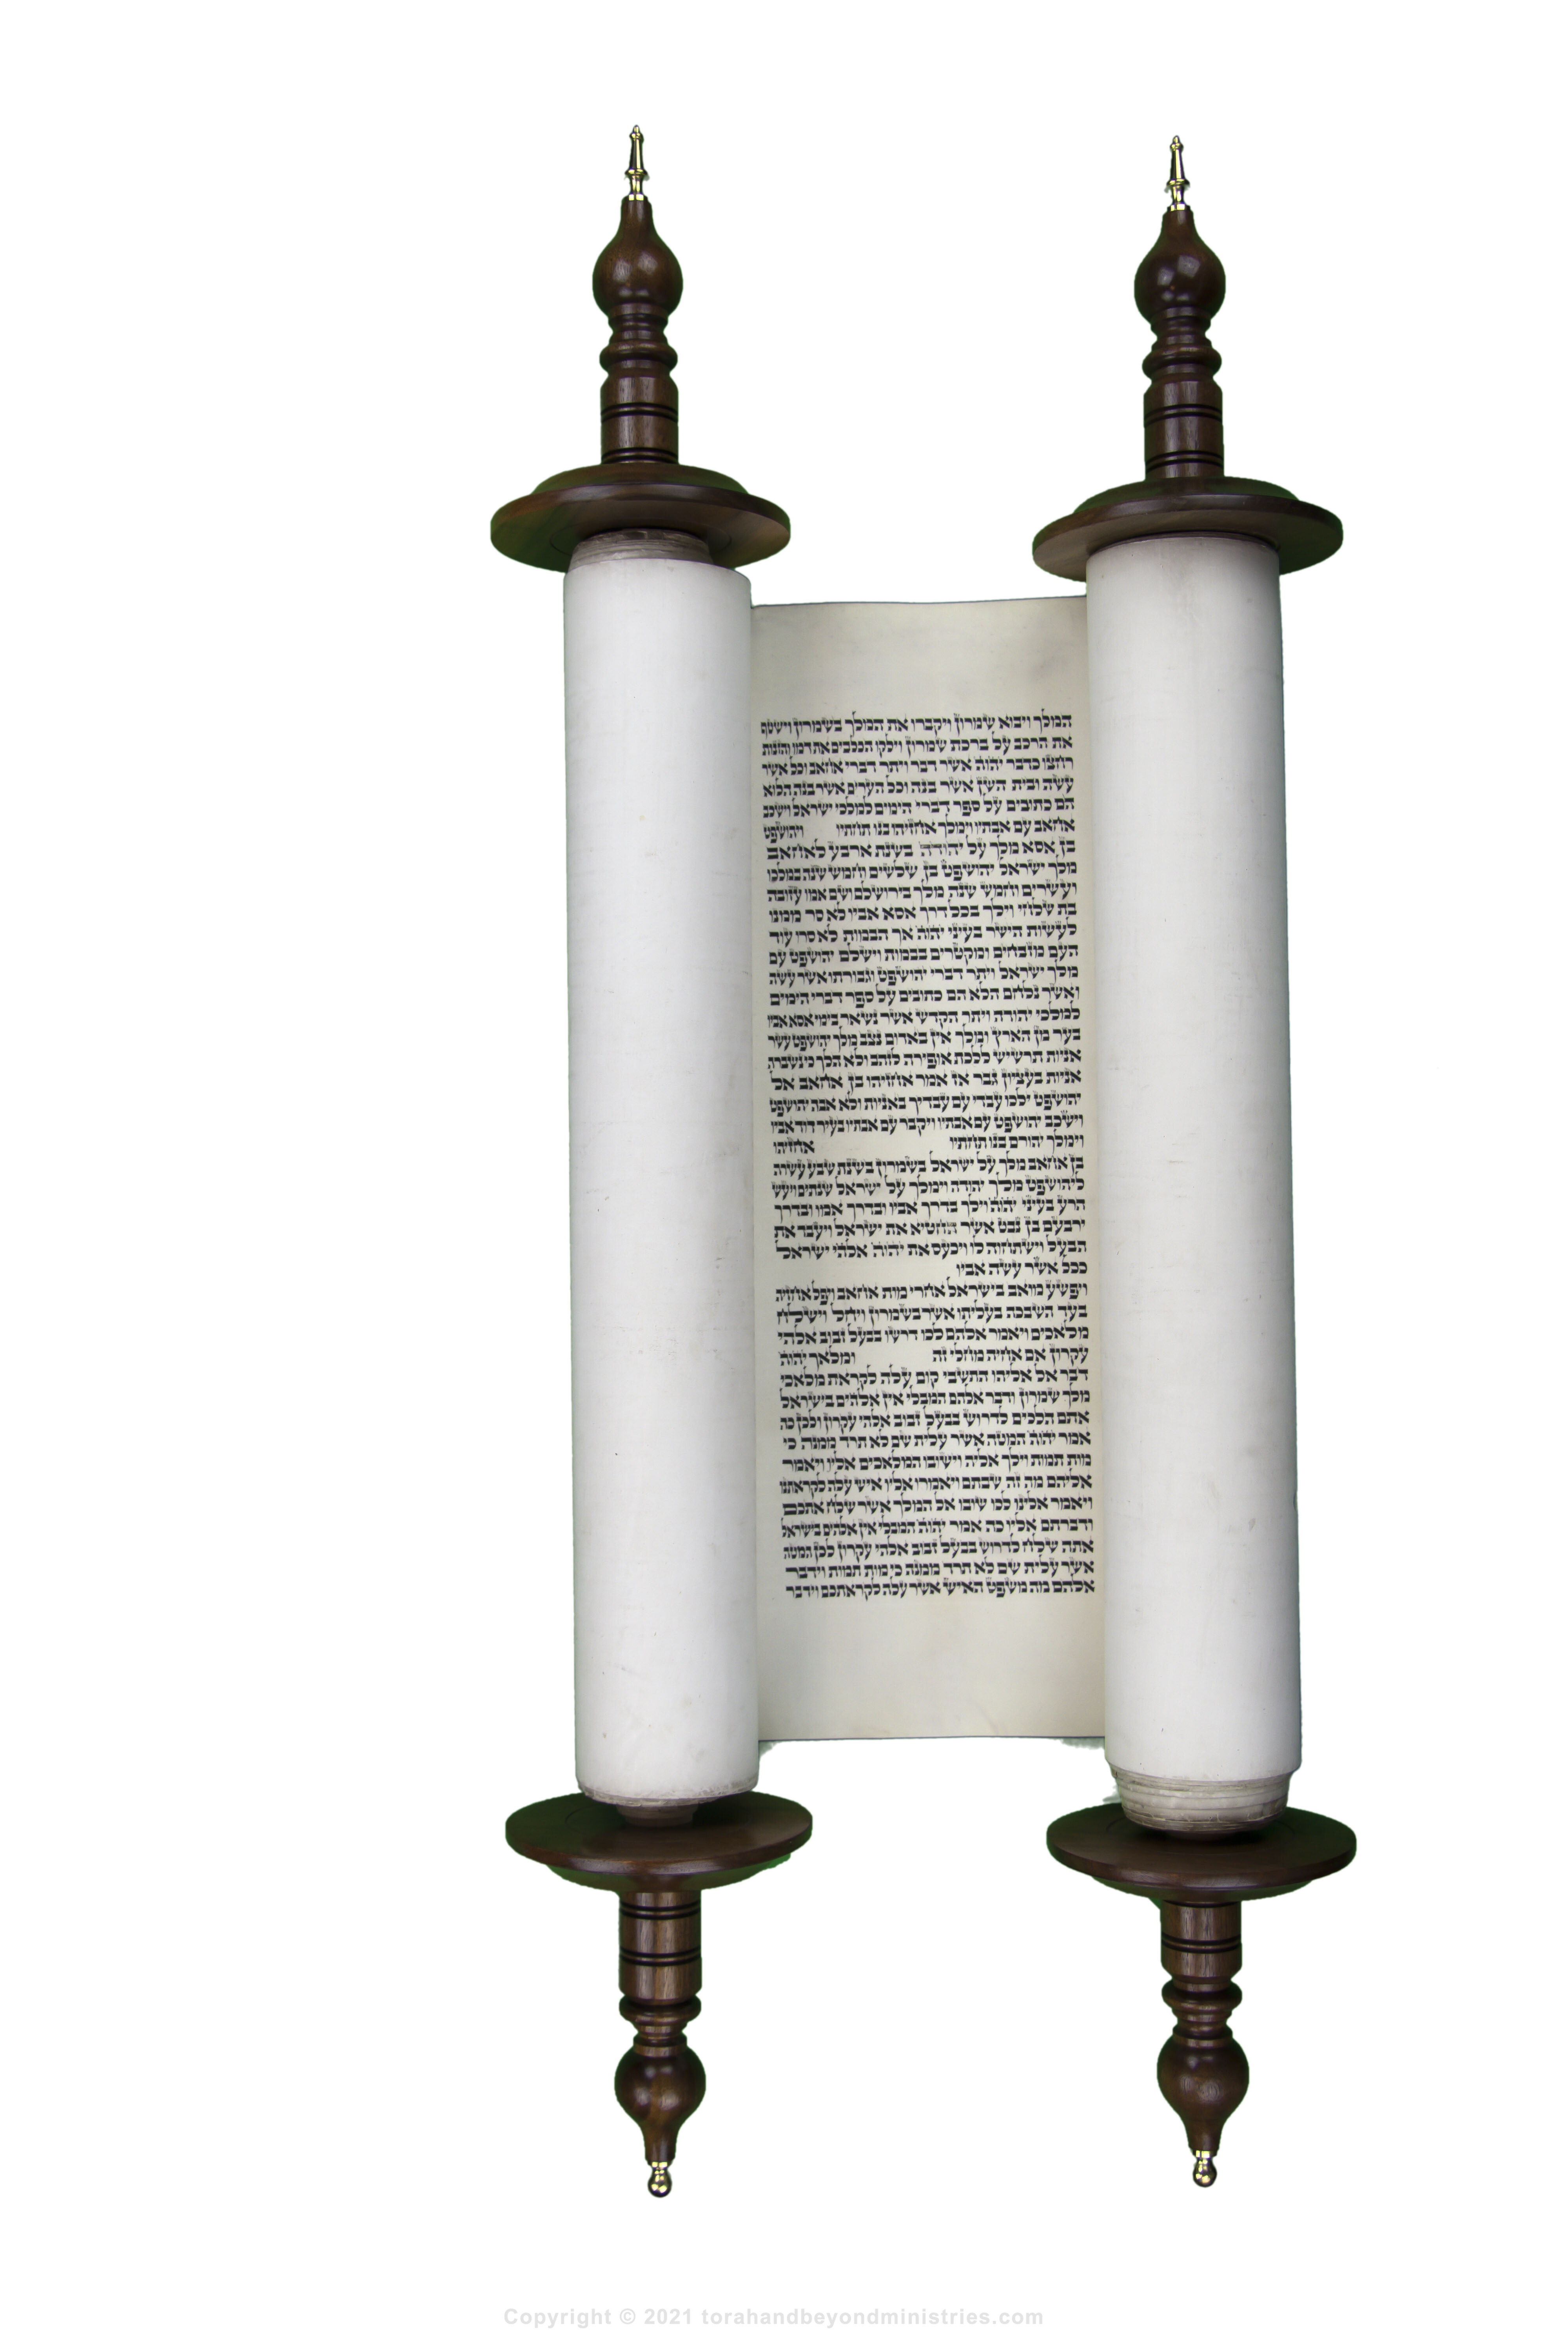 Hebrew Scroll of Kings showing the division of first and second Kings